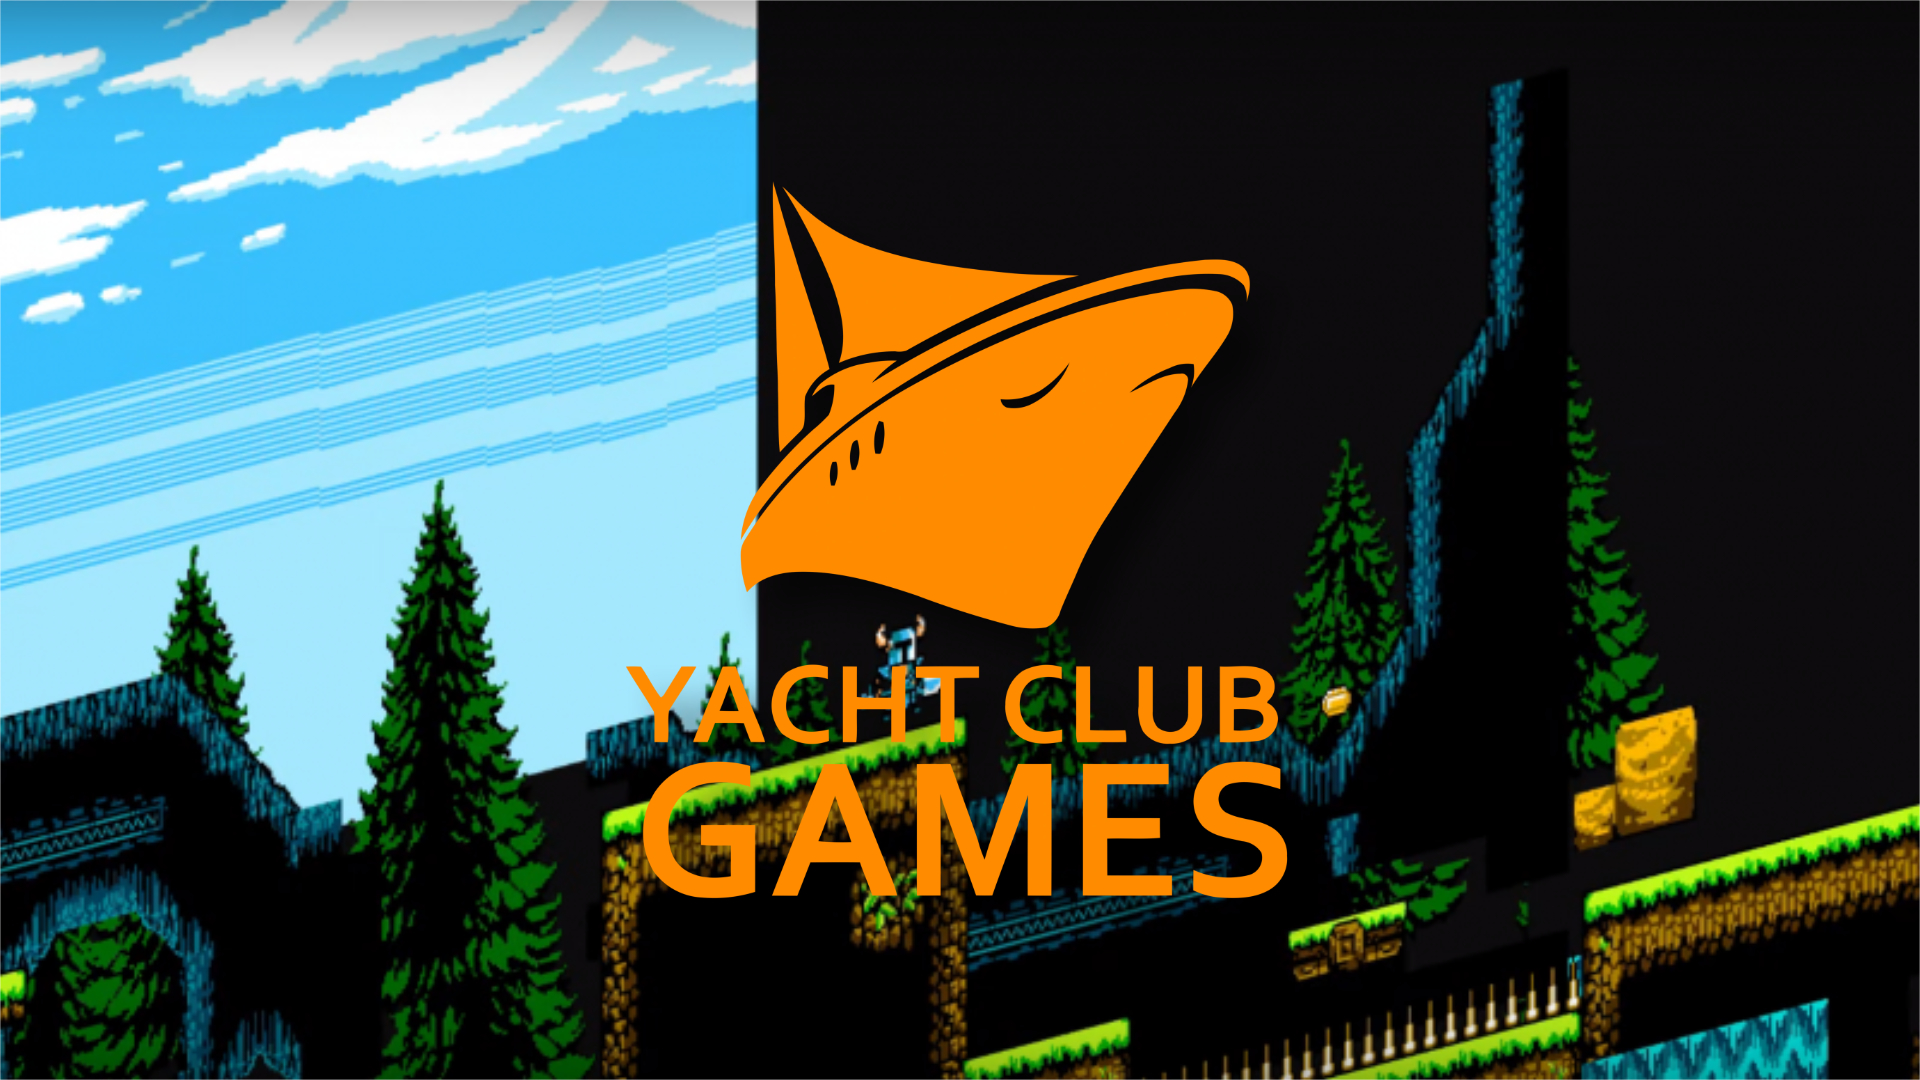 Yacht Club Games have been working on a 3D game for half a decade | KitGuru